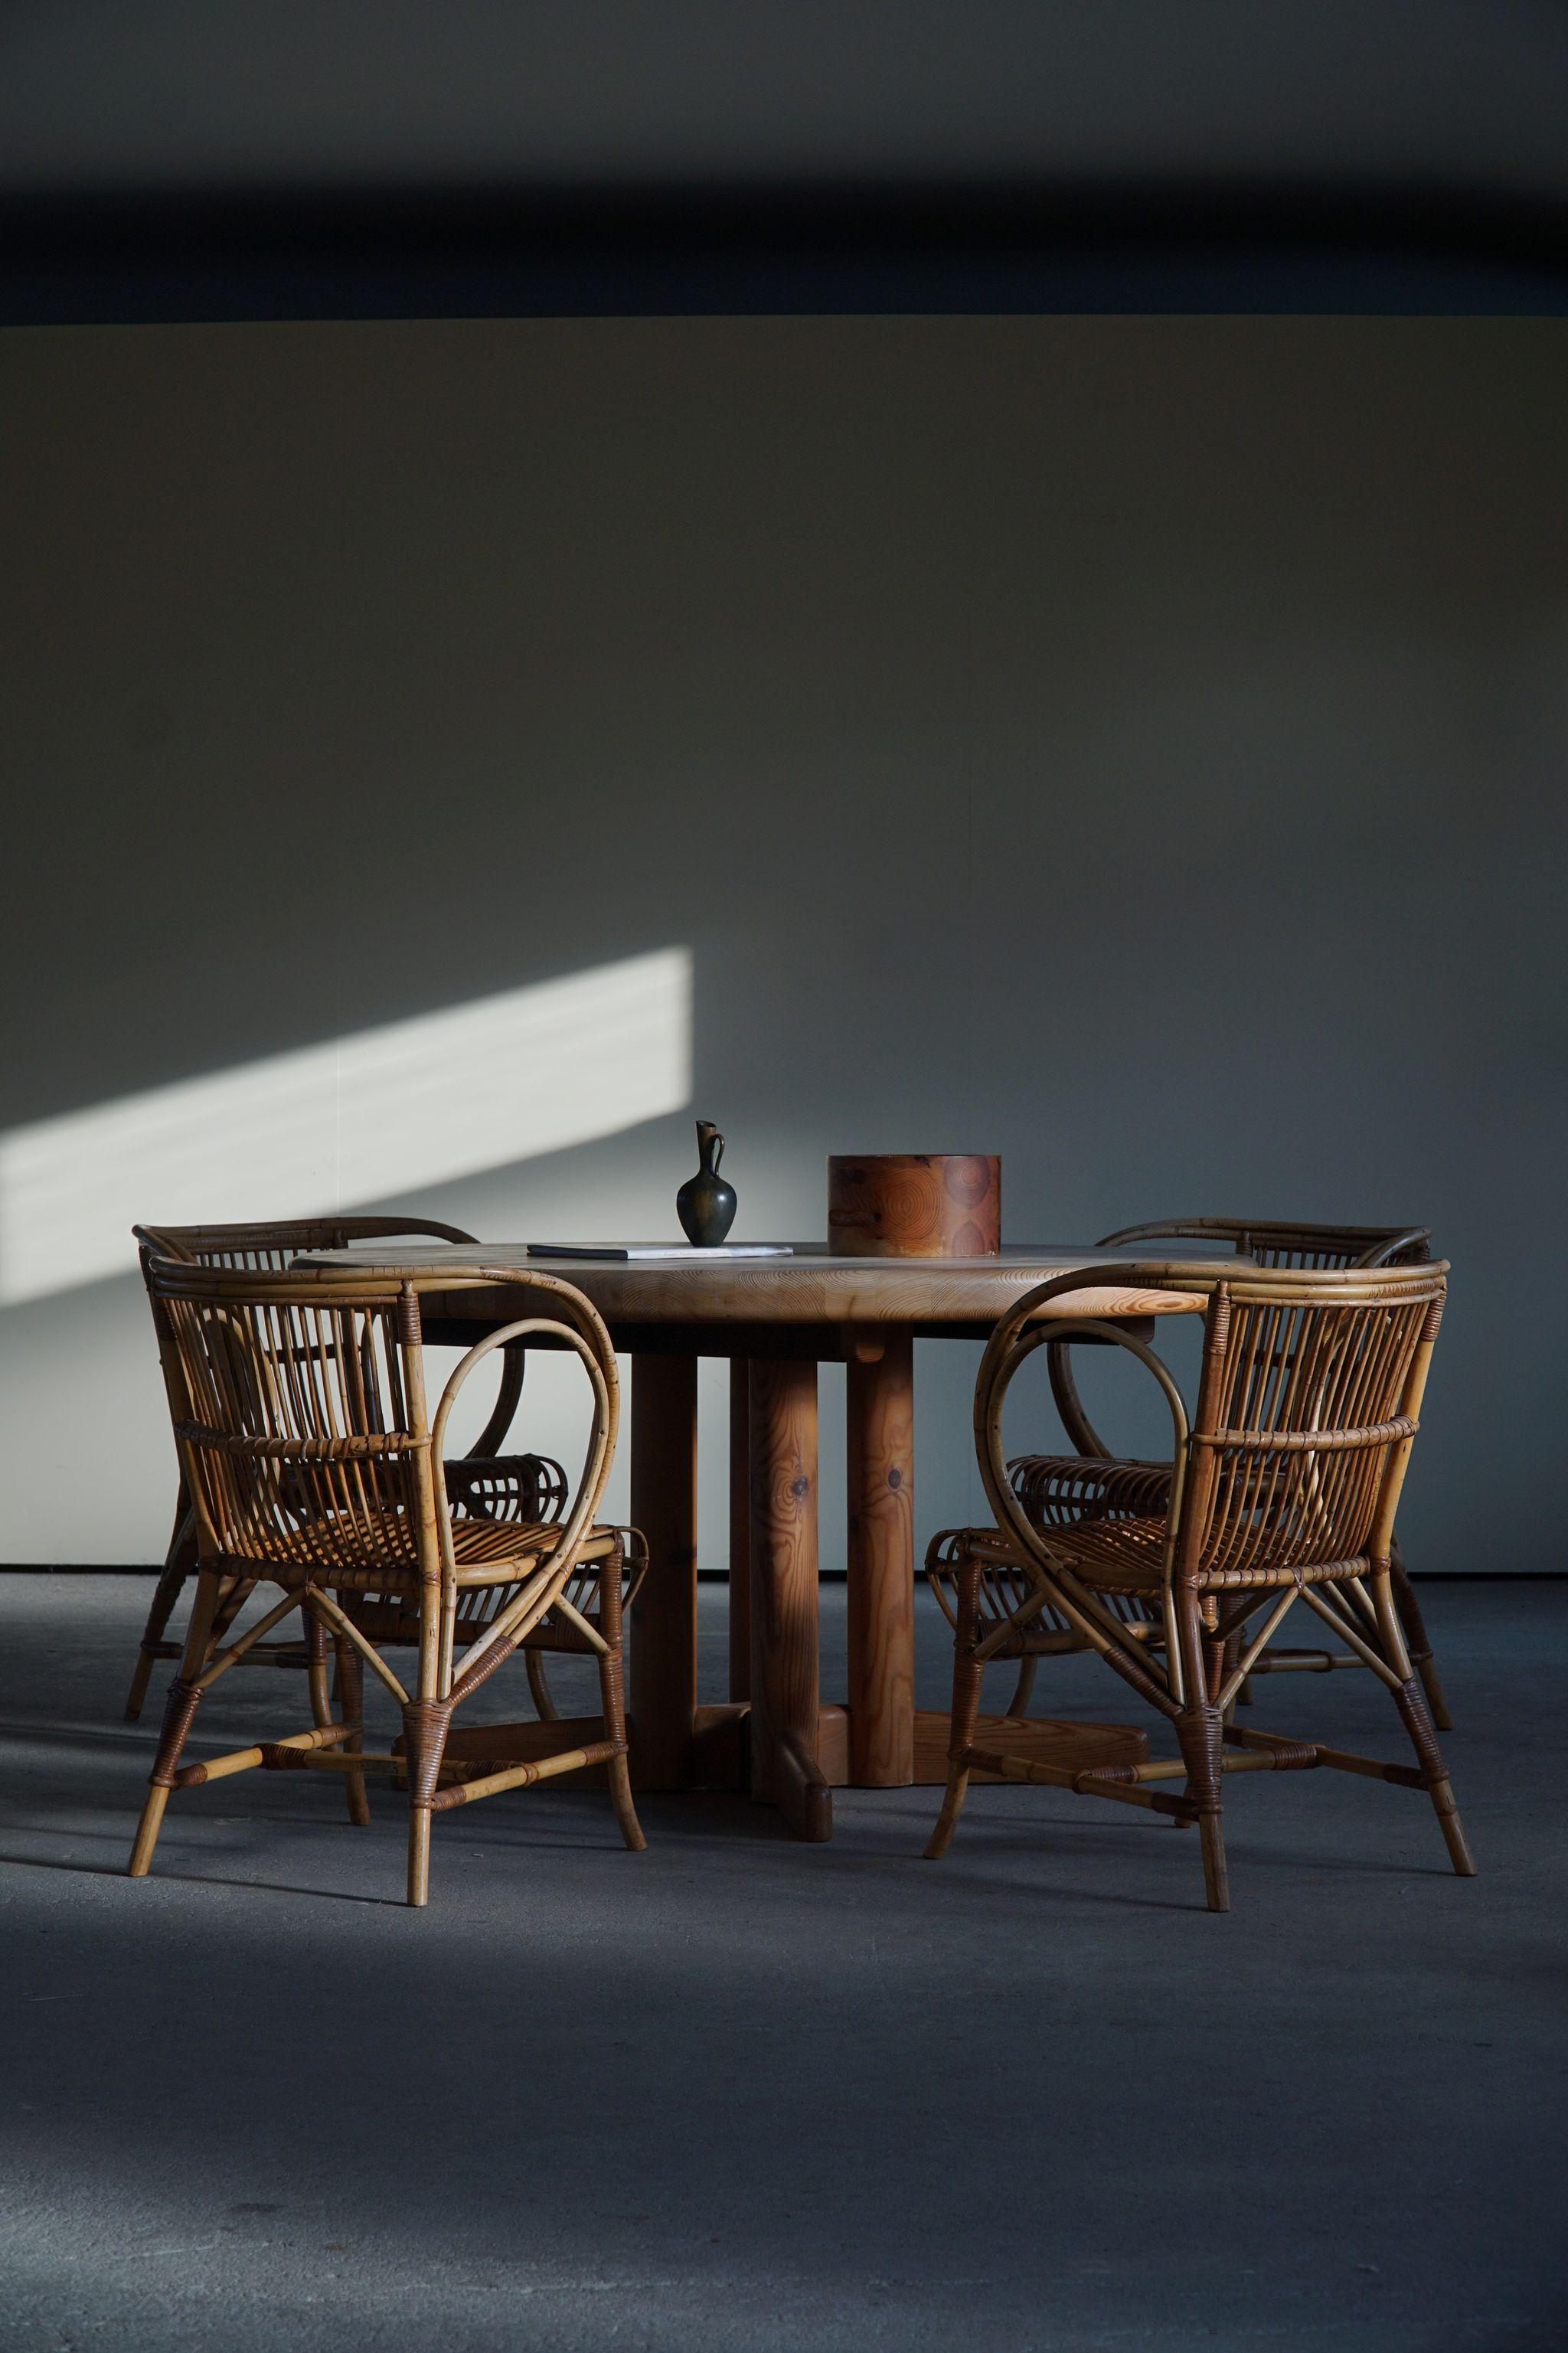 Round dining table in solid pine, made by Rainer Daumiller for Hirtshals Savværk, 1970s.

Space for 6 people.

A great brutalist object for the modern interior. A warm colour and patina that pair well with the minimalist scandinavian lifestyle.